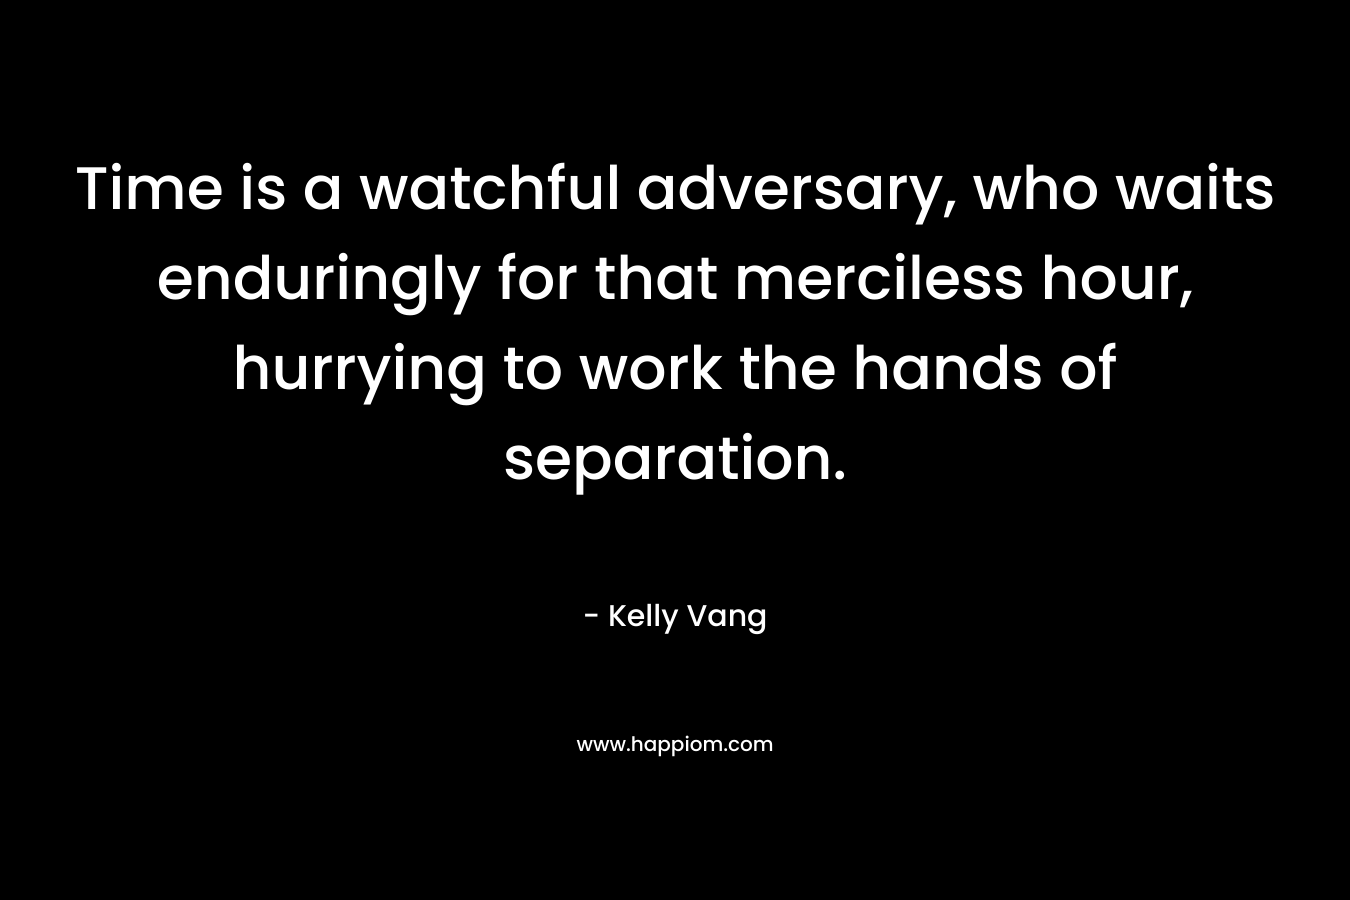 Time is a watchful adversary, who waits enduringly for that merciless hour, hurrying to work the hands of separation. – Kelly Vang